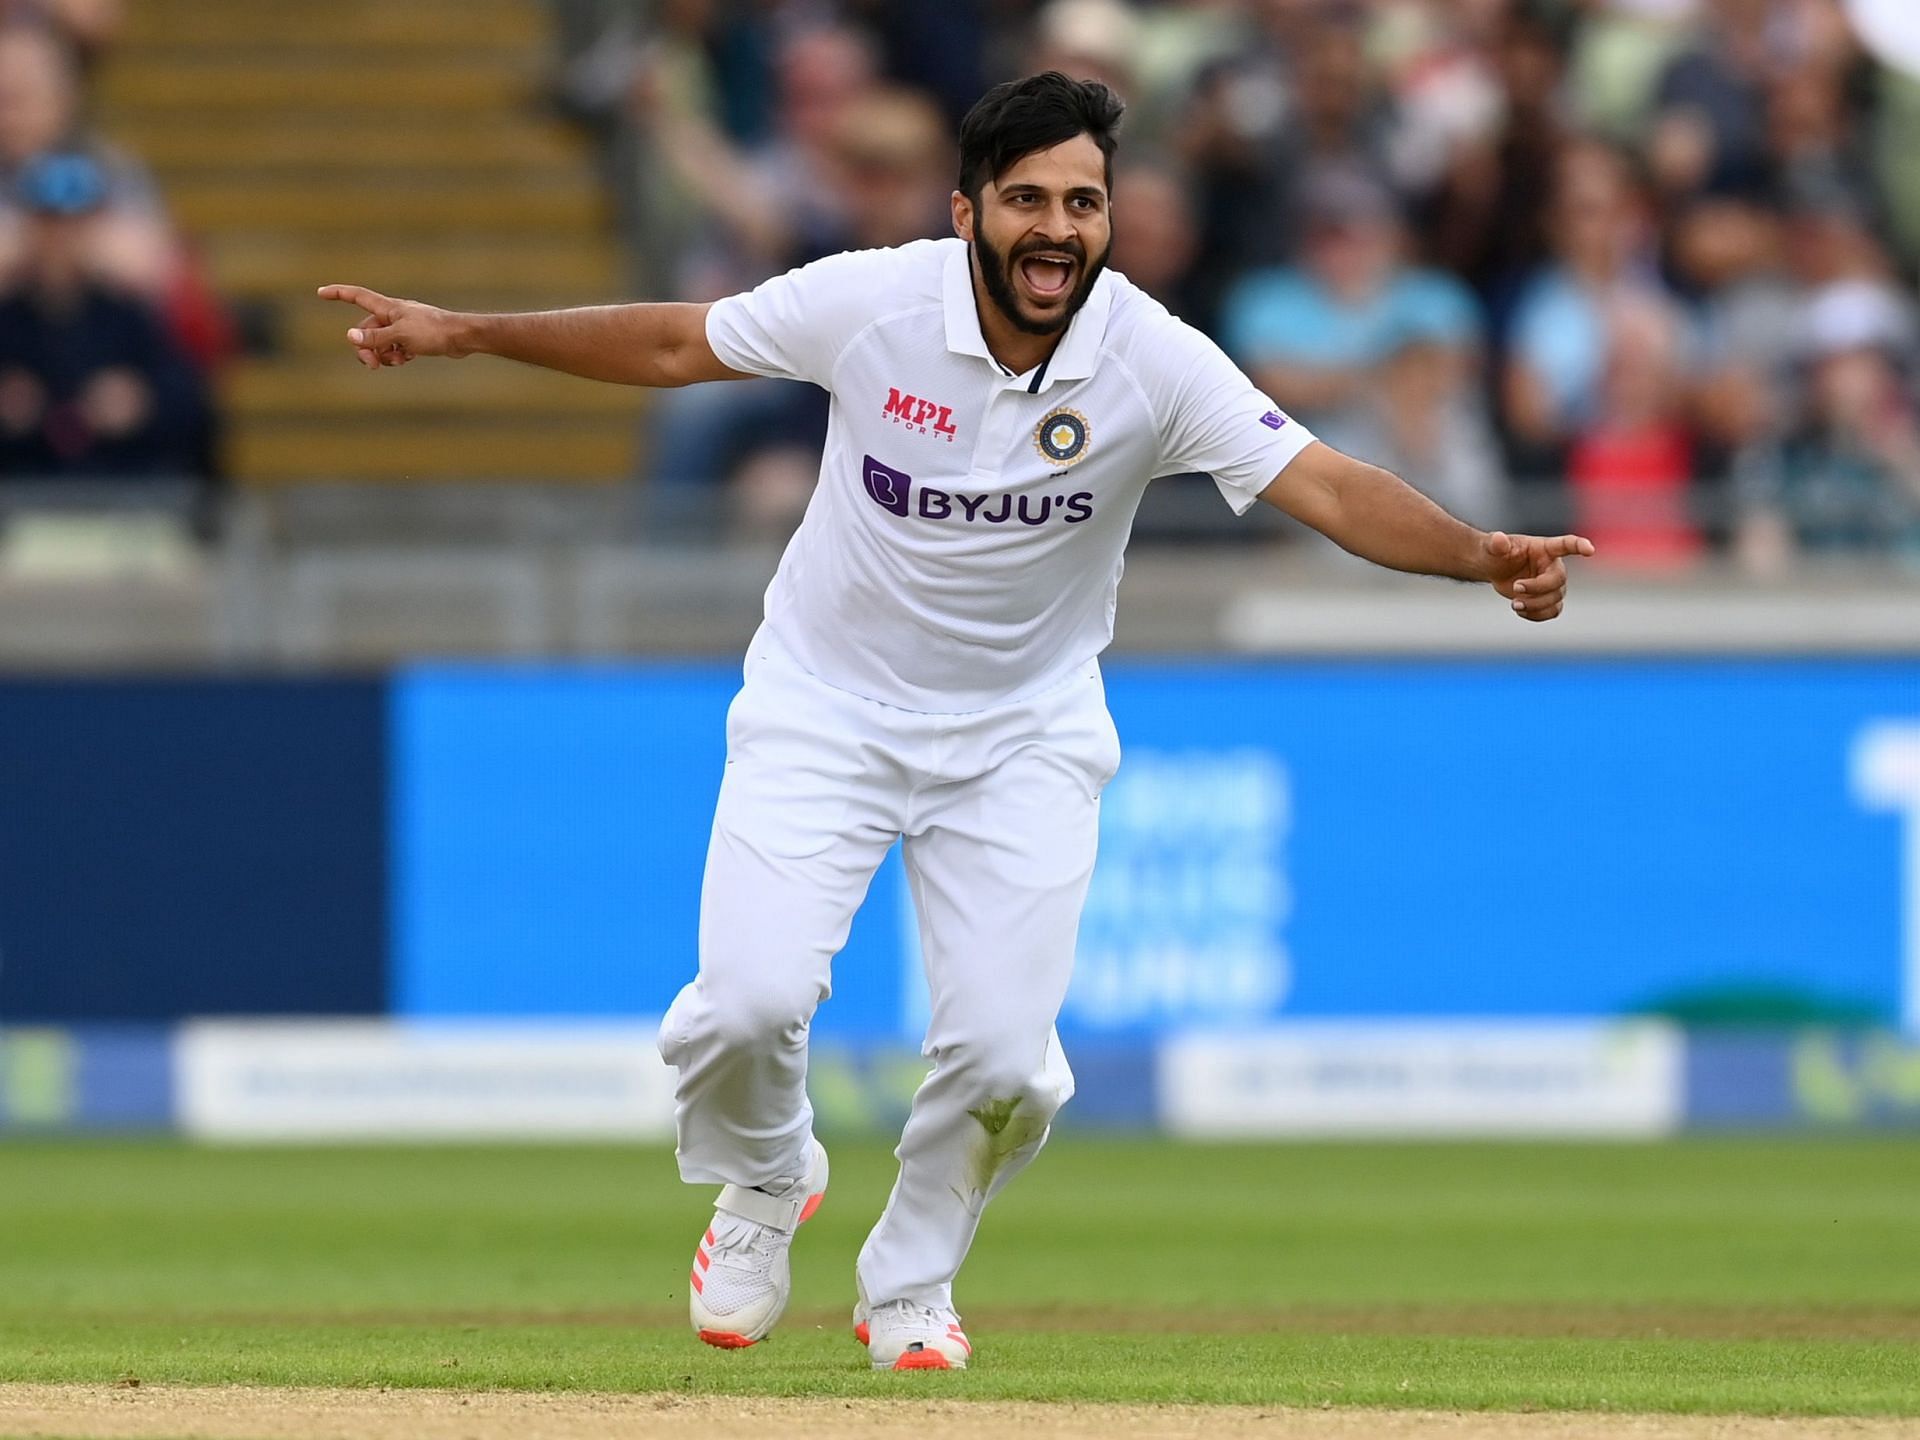 Shardul Thakur had a poor showing against England